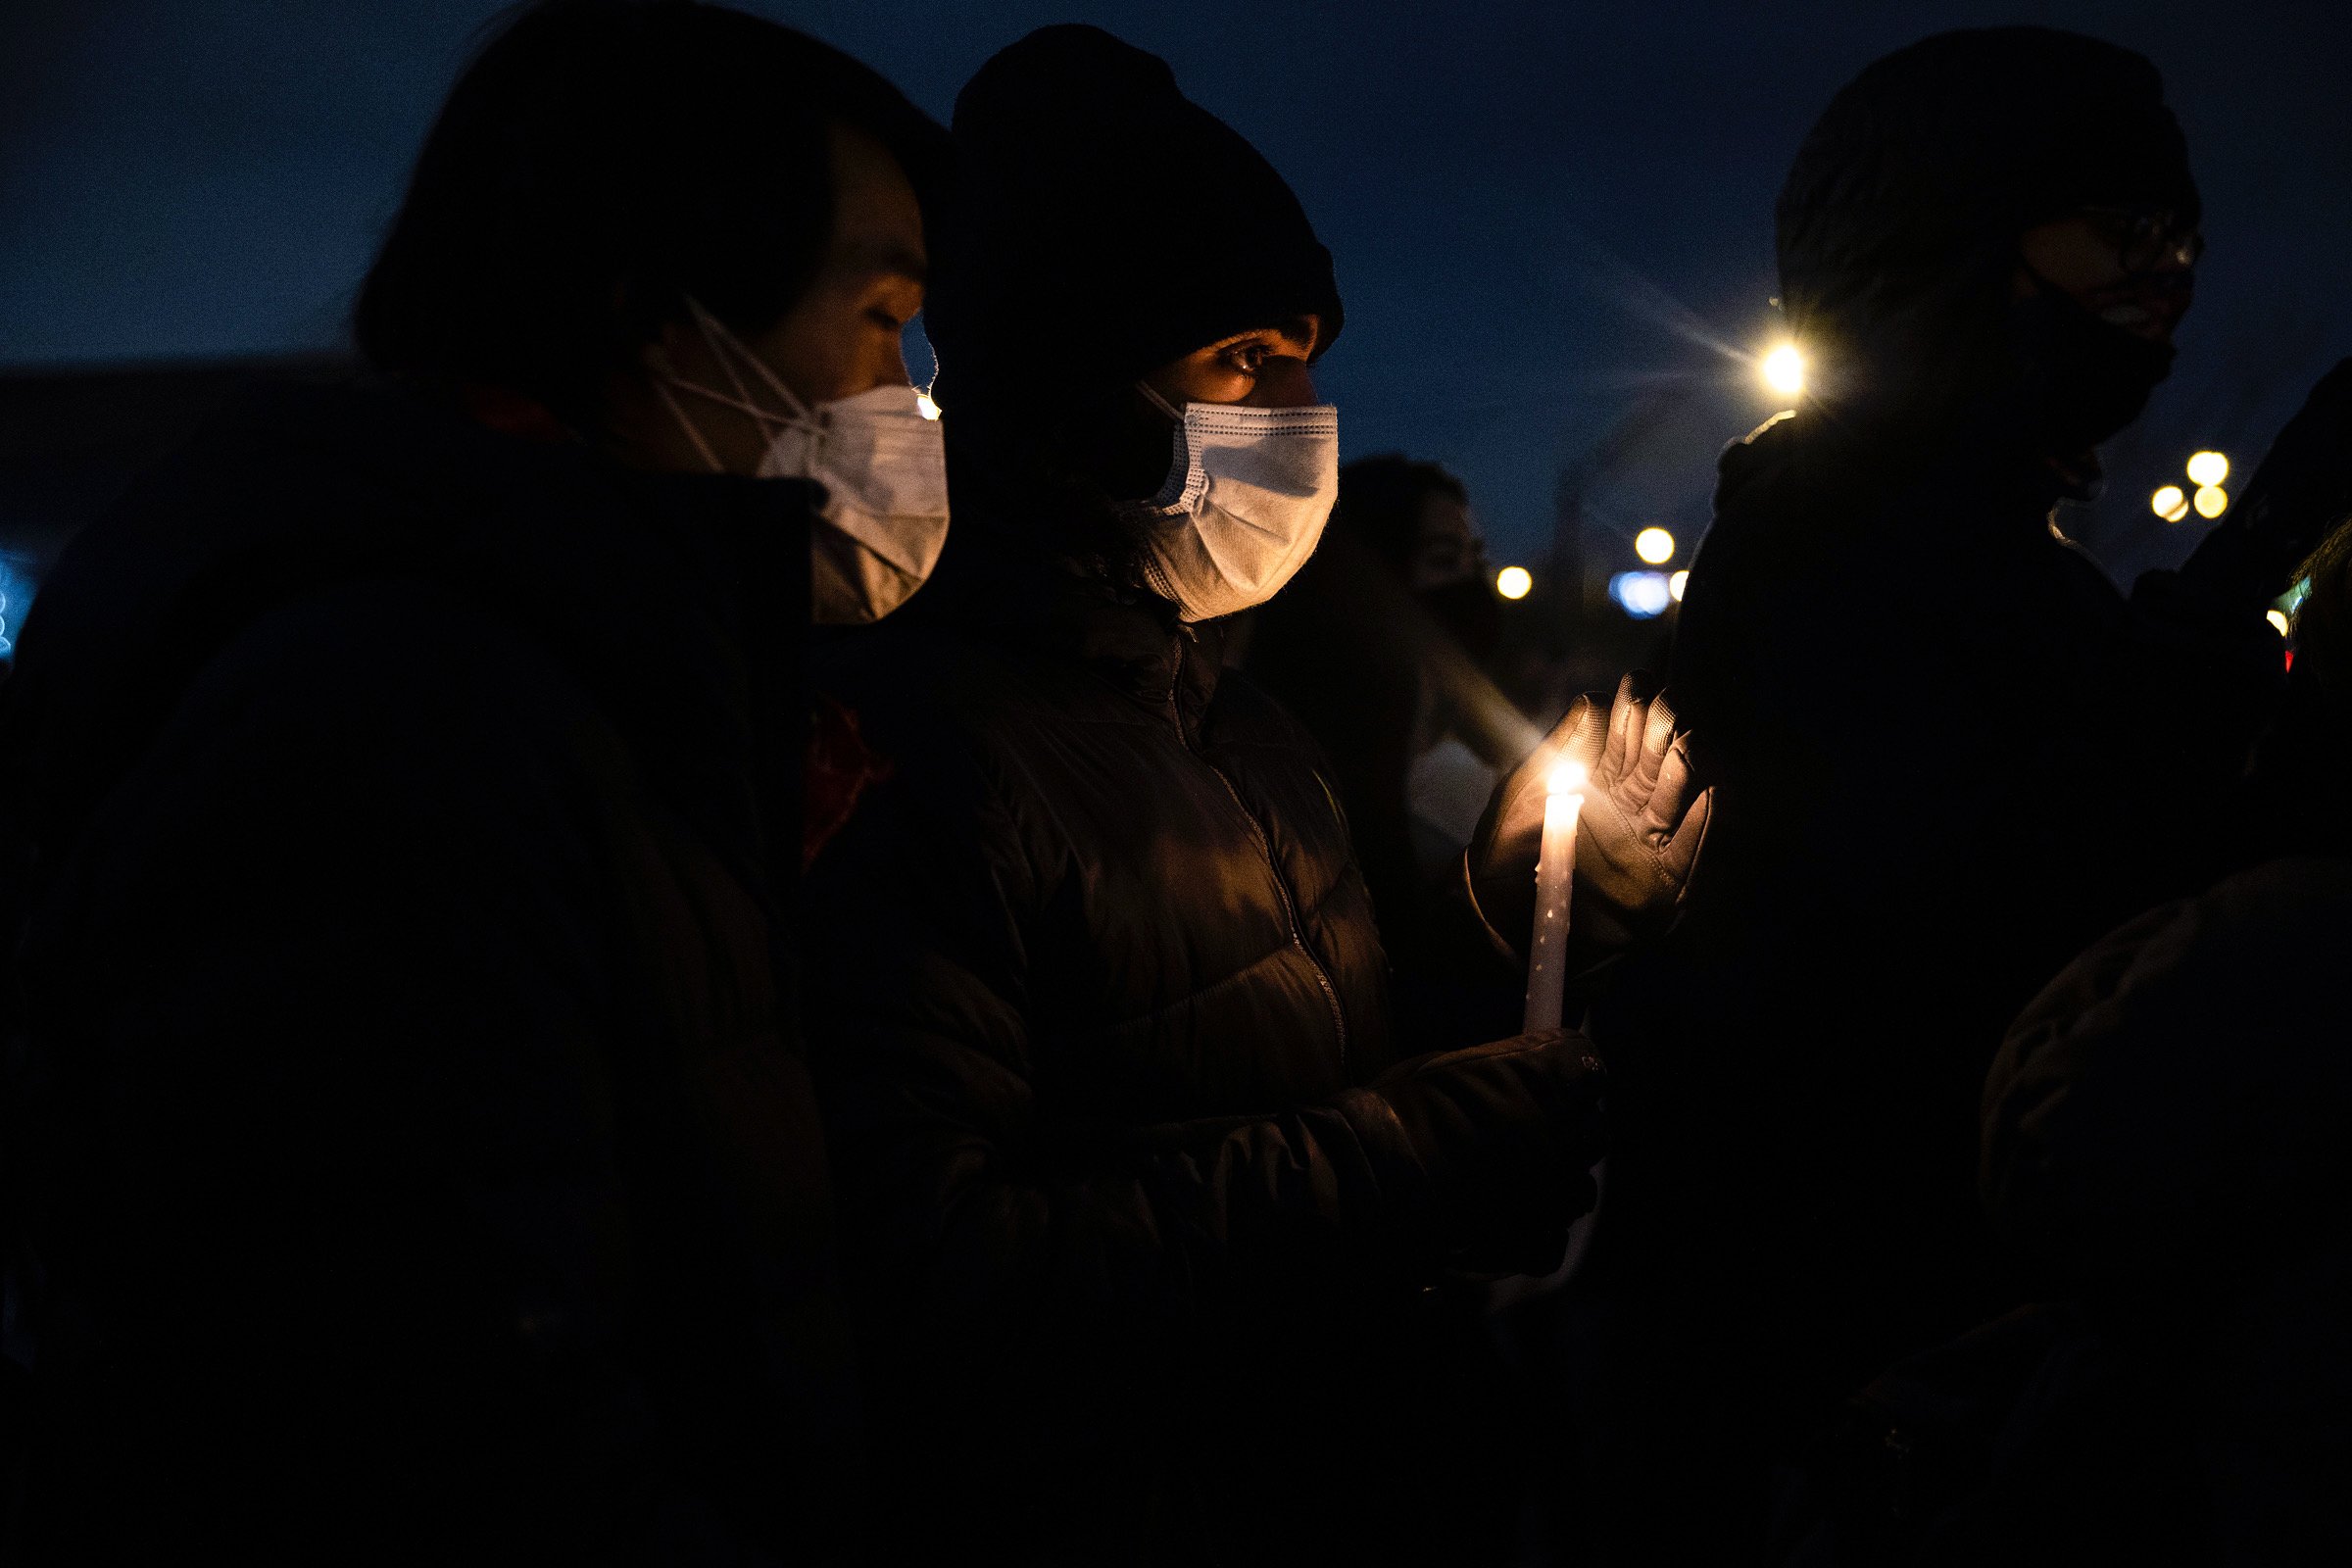  About 100 people attend a vigil in solidarity with the Asian American community after increased attacks on the community since the onset of the coronavirus pandemic a year ago, in Philadelphia, Pennsylvania on March 17, 2021. (On assignment for Reut